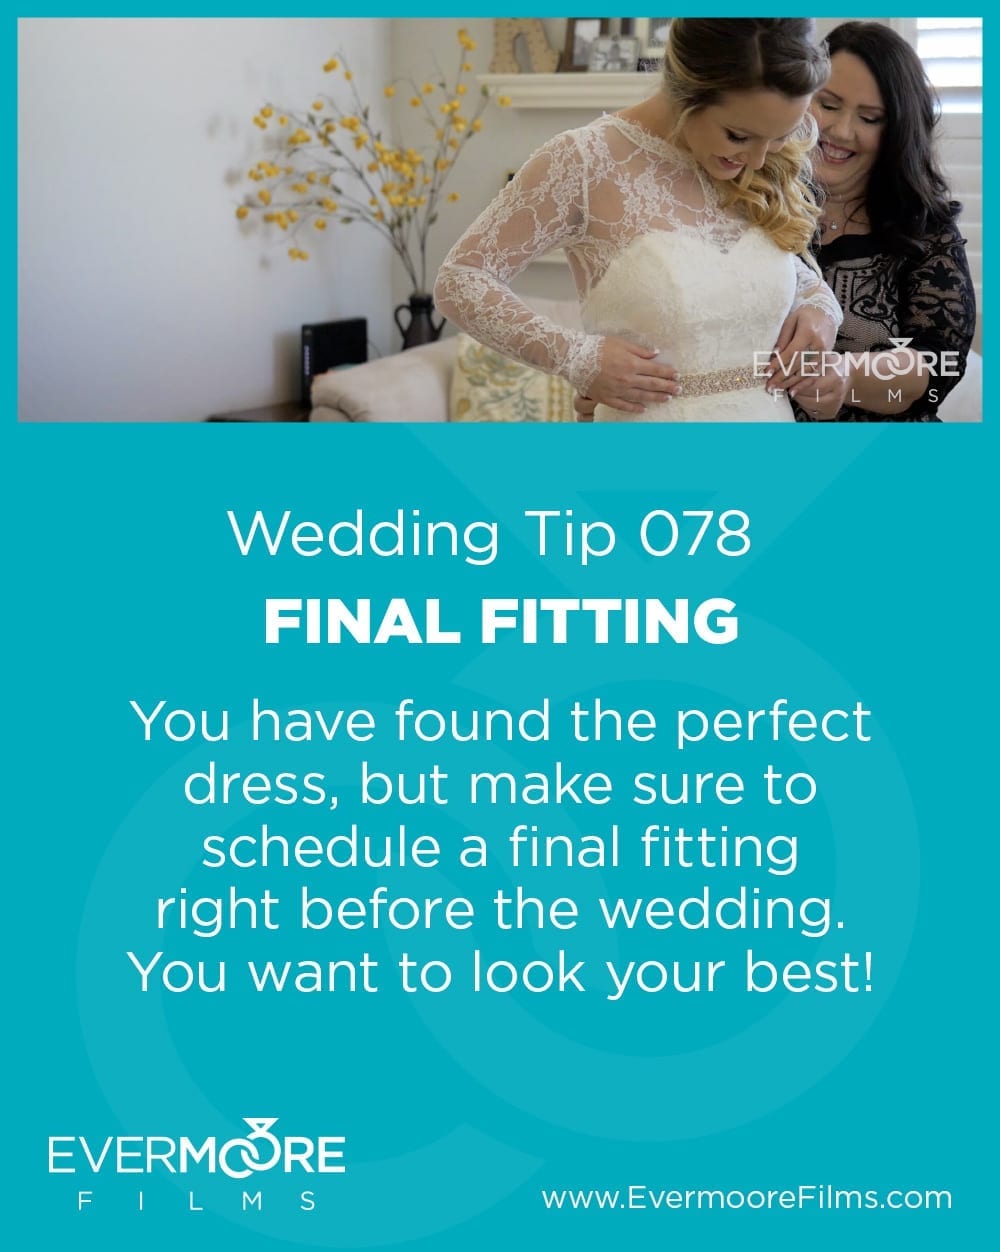 Schedule the final fitting close to the wedding date | www.EvermooreFilms.com